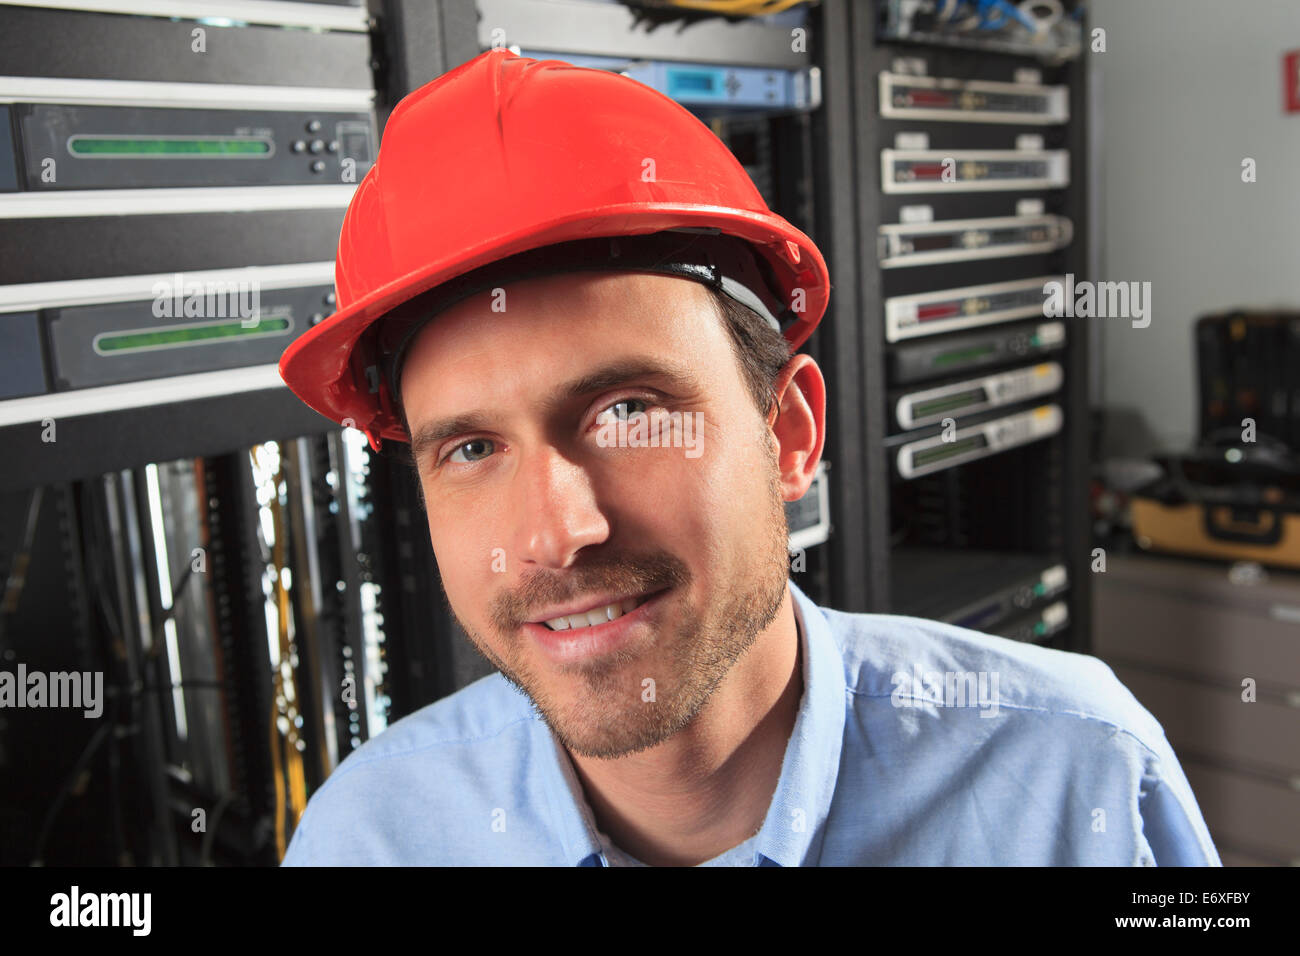 Network engineer in data distribution center Stock Photo